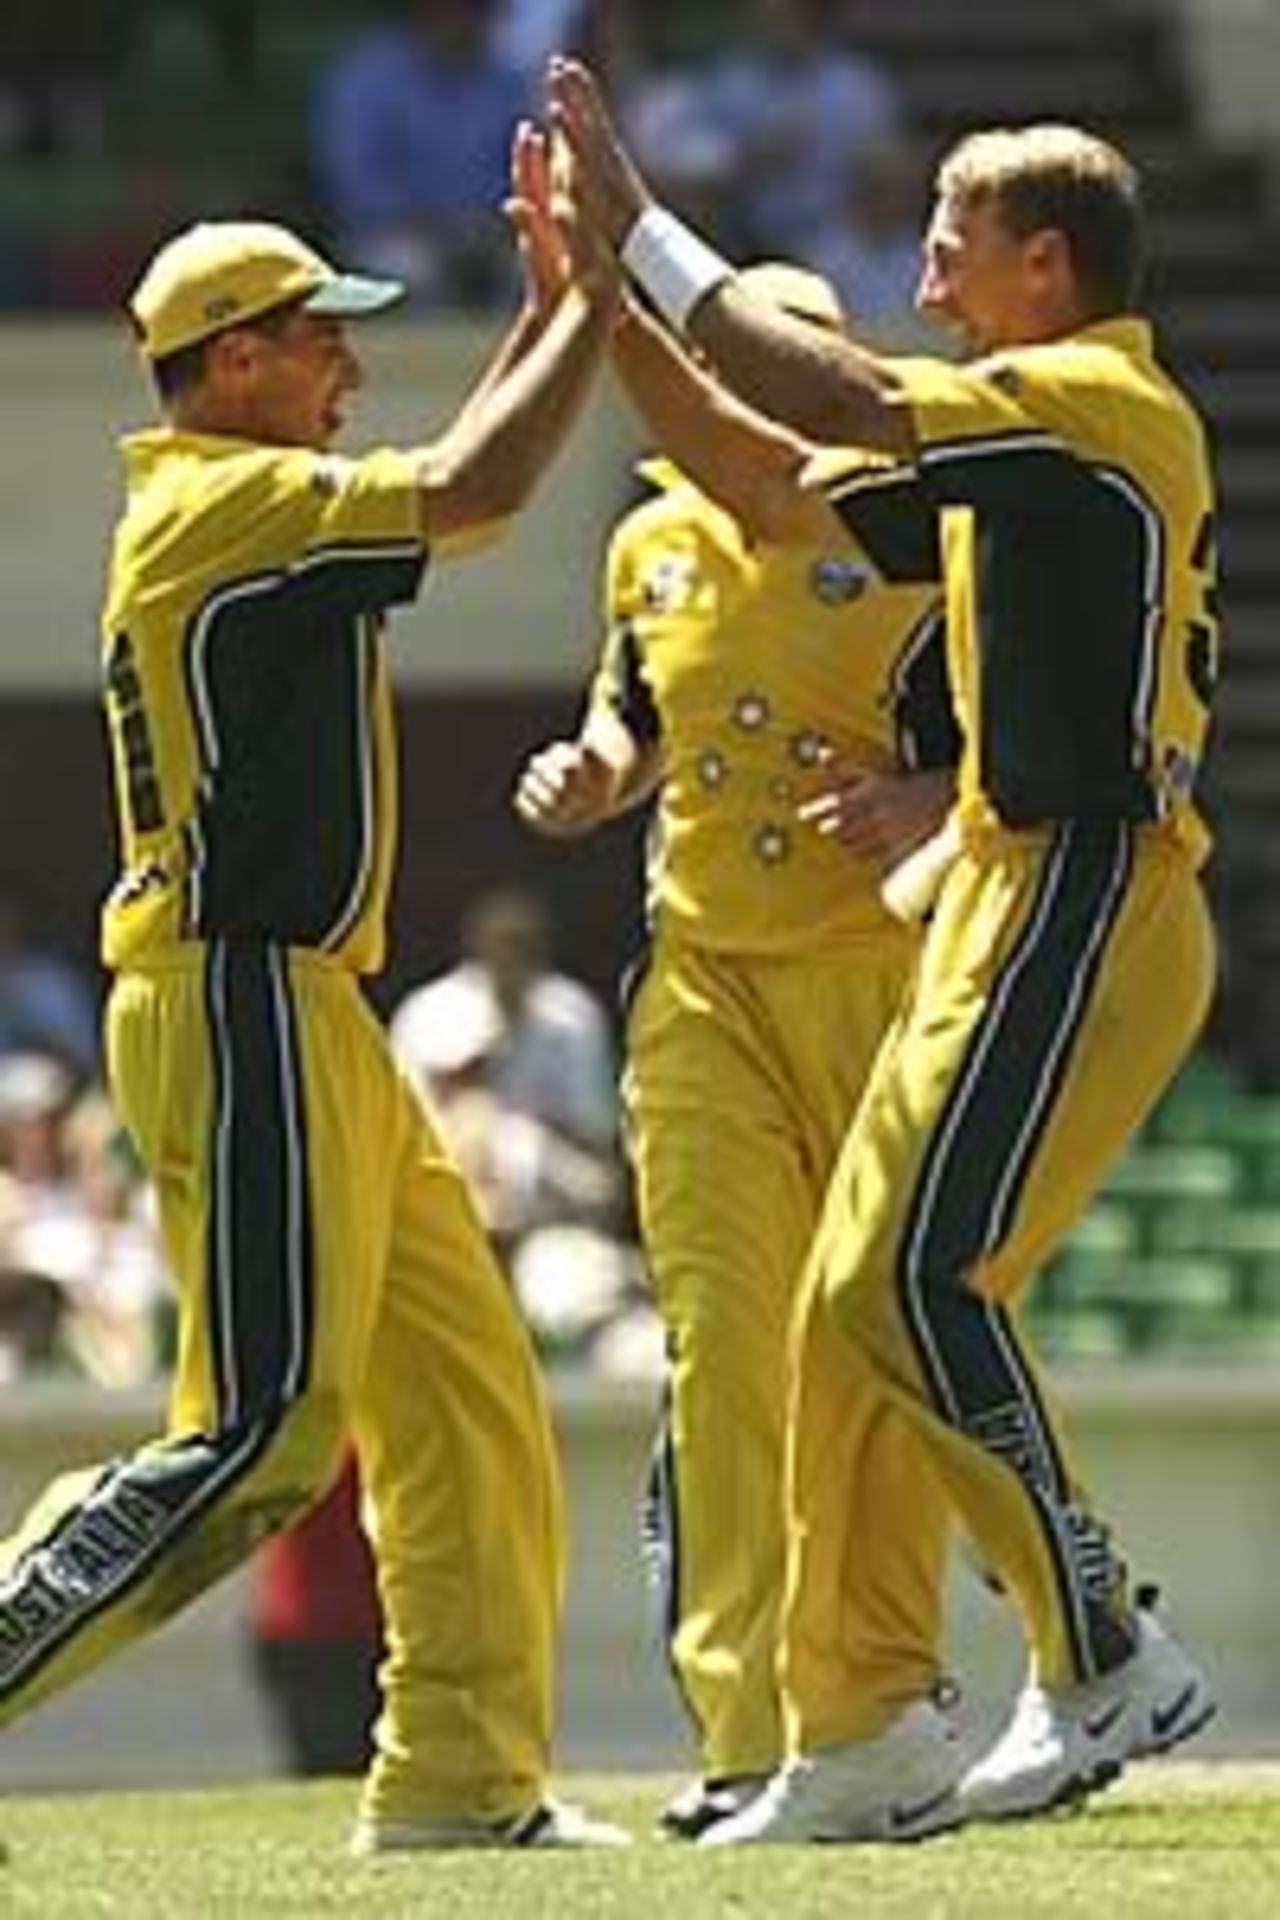 MELBOURNE - JANUARY 21: Andy Bichel and Brad Hogg of Australia celebrate the wicket of Marvan Atapattu of Sri Lanka during the One Day International match between Australia and Sri Lanka at the Melbourne Cricket Ground in Melbourne, Australia on January 21, 2003.